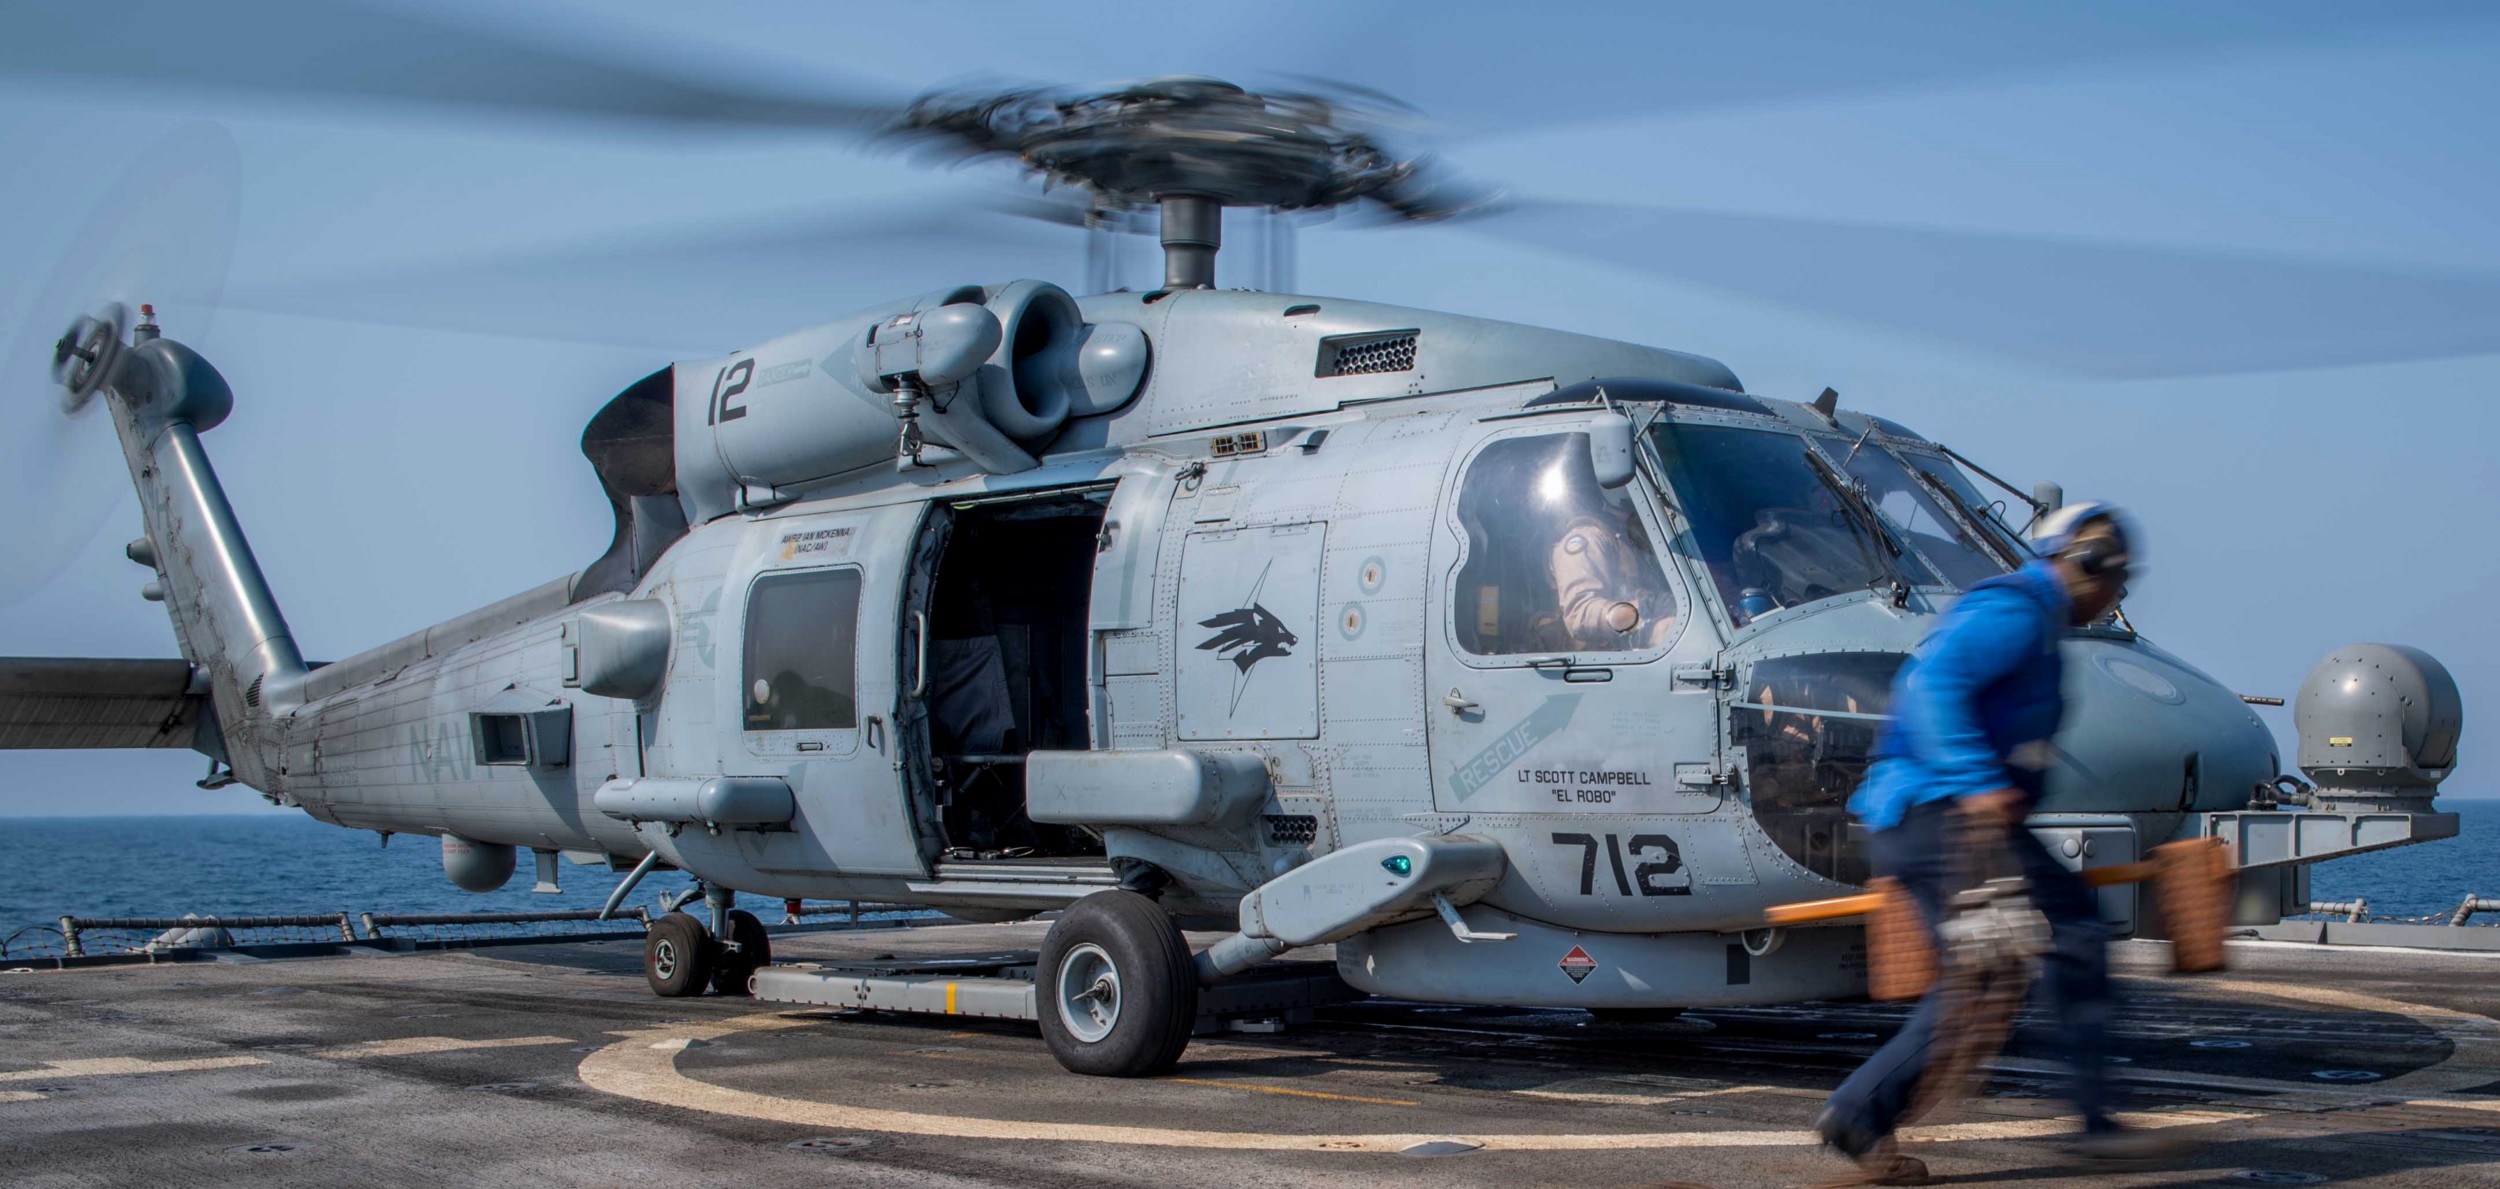 hsm-75 wolfpack helicopter maritime strike squadron us navy mh-60r seahawk 2017 05 uss princeton cg-59